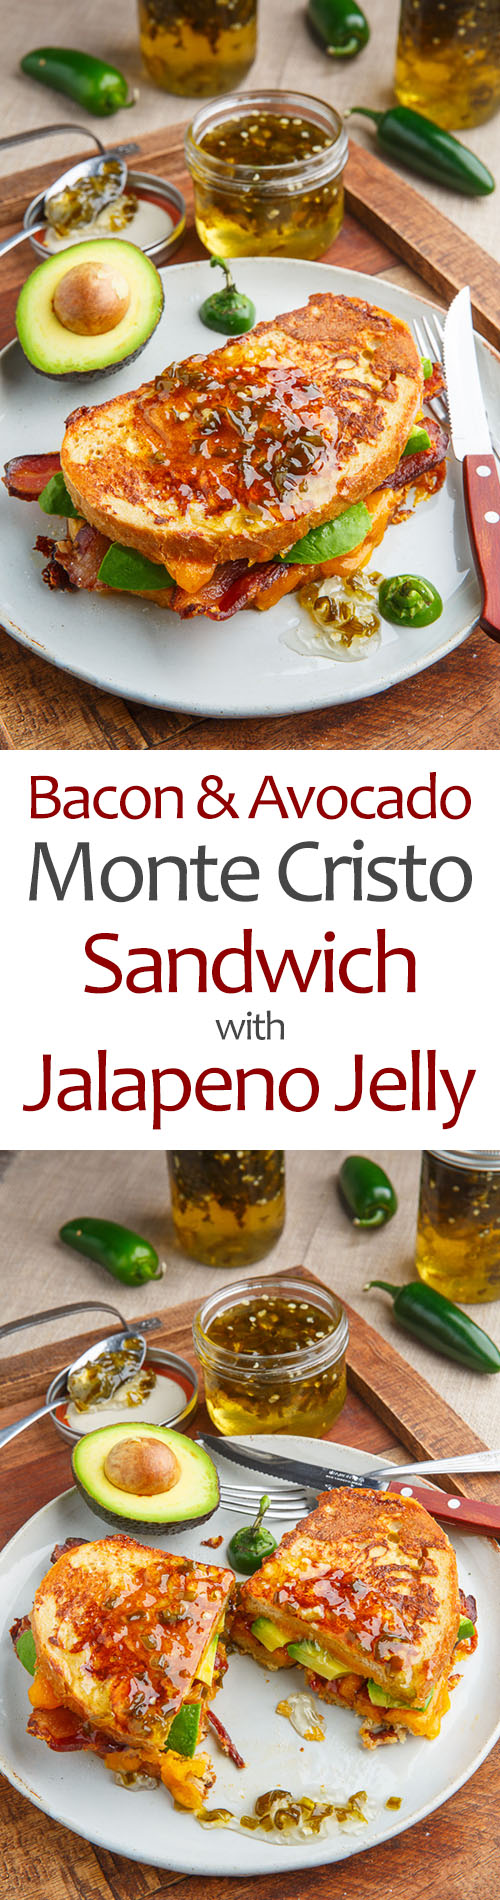 Bacon and Avocado Monte Cristo Sandwich with Jalapeno Jelly